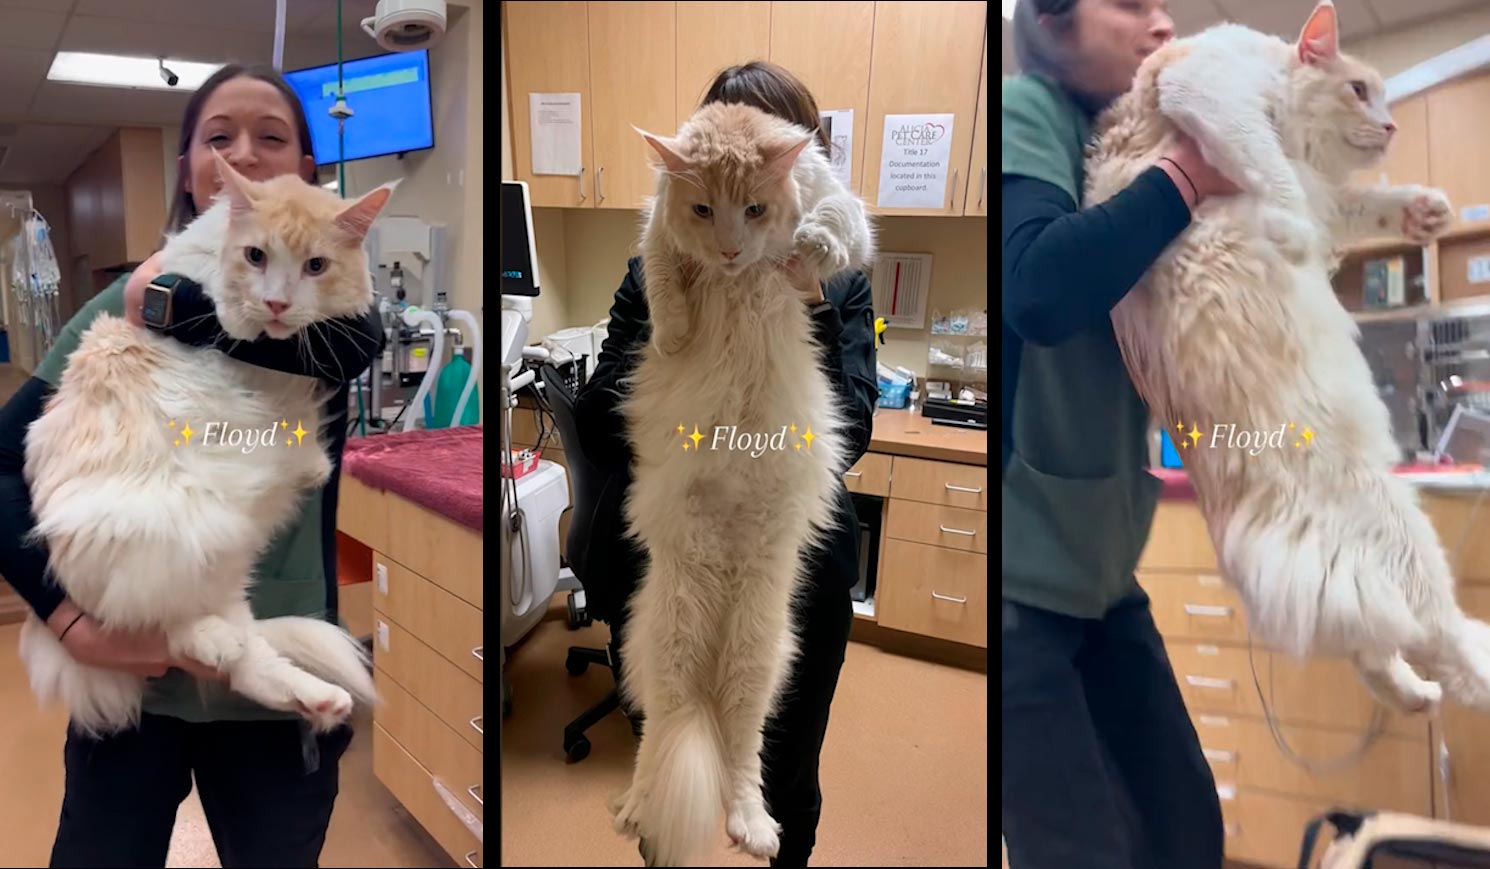 Meet Floyd, the giant Maine Coon cat that weighs 12.7 kilograms